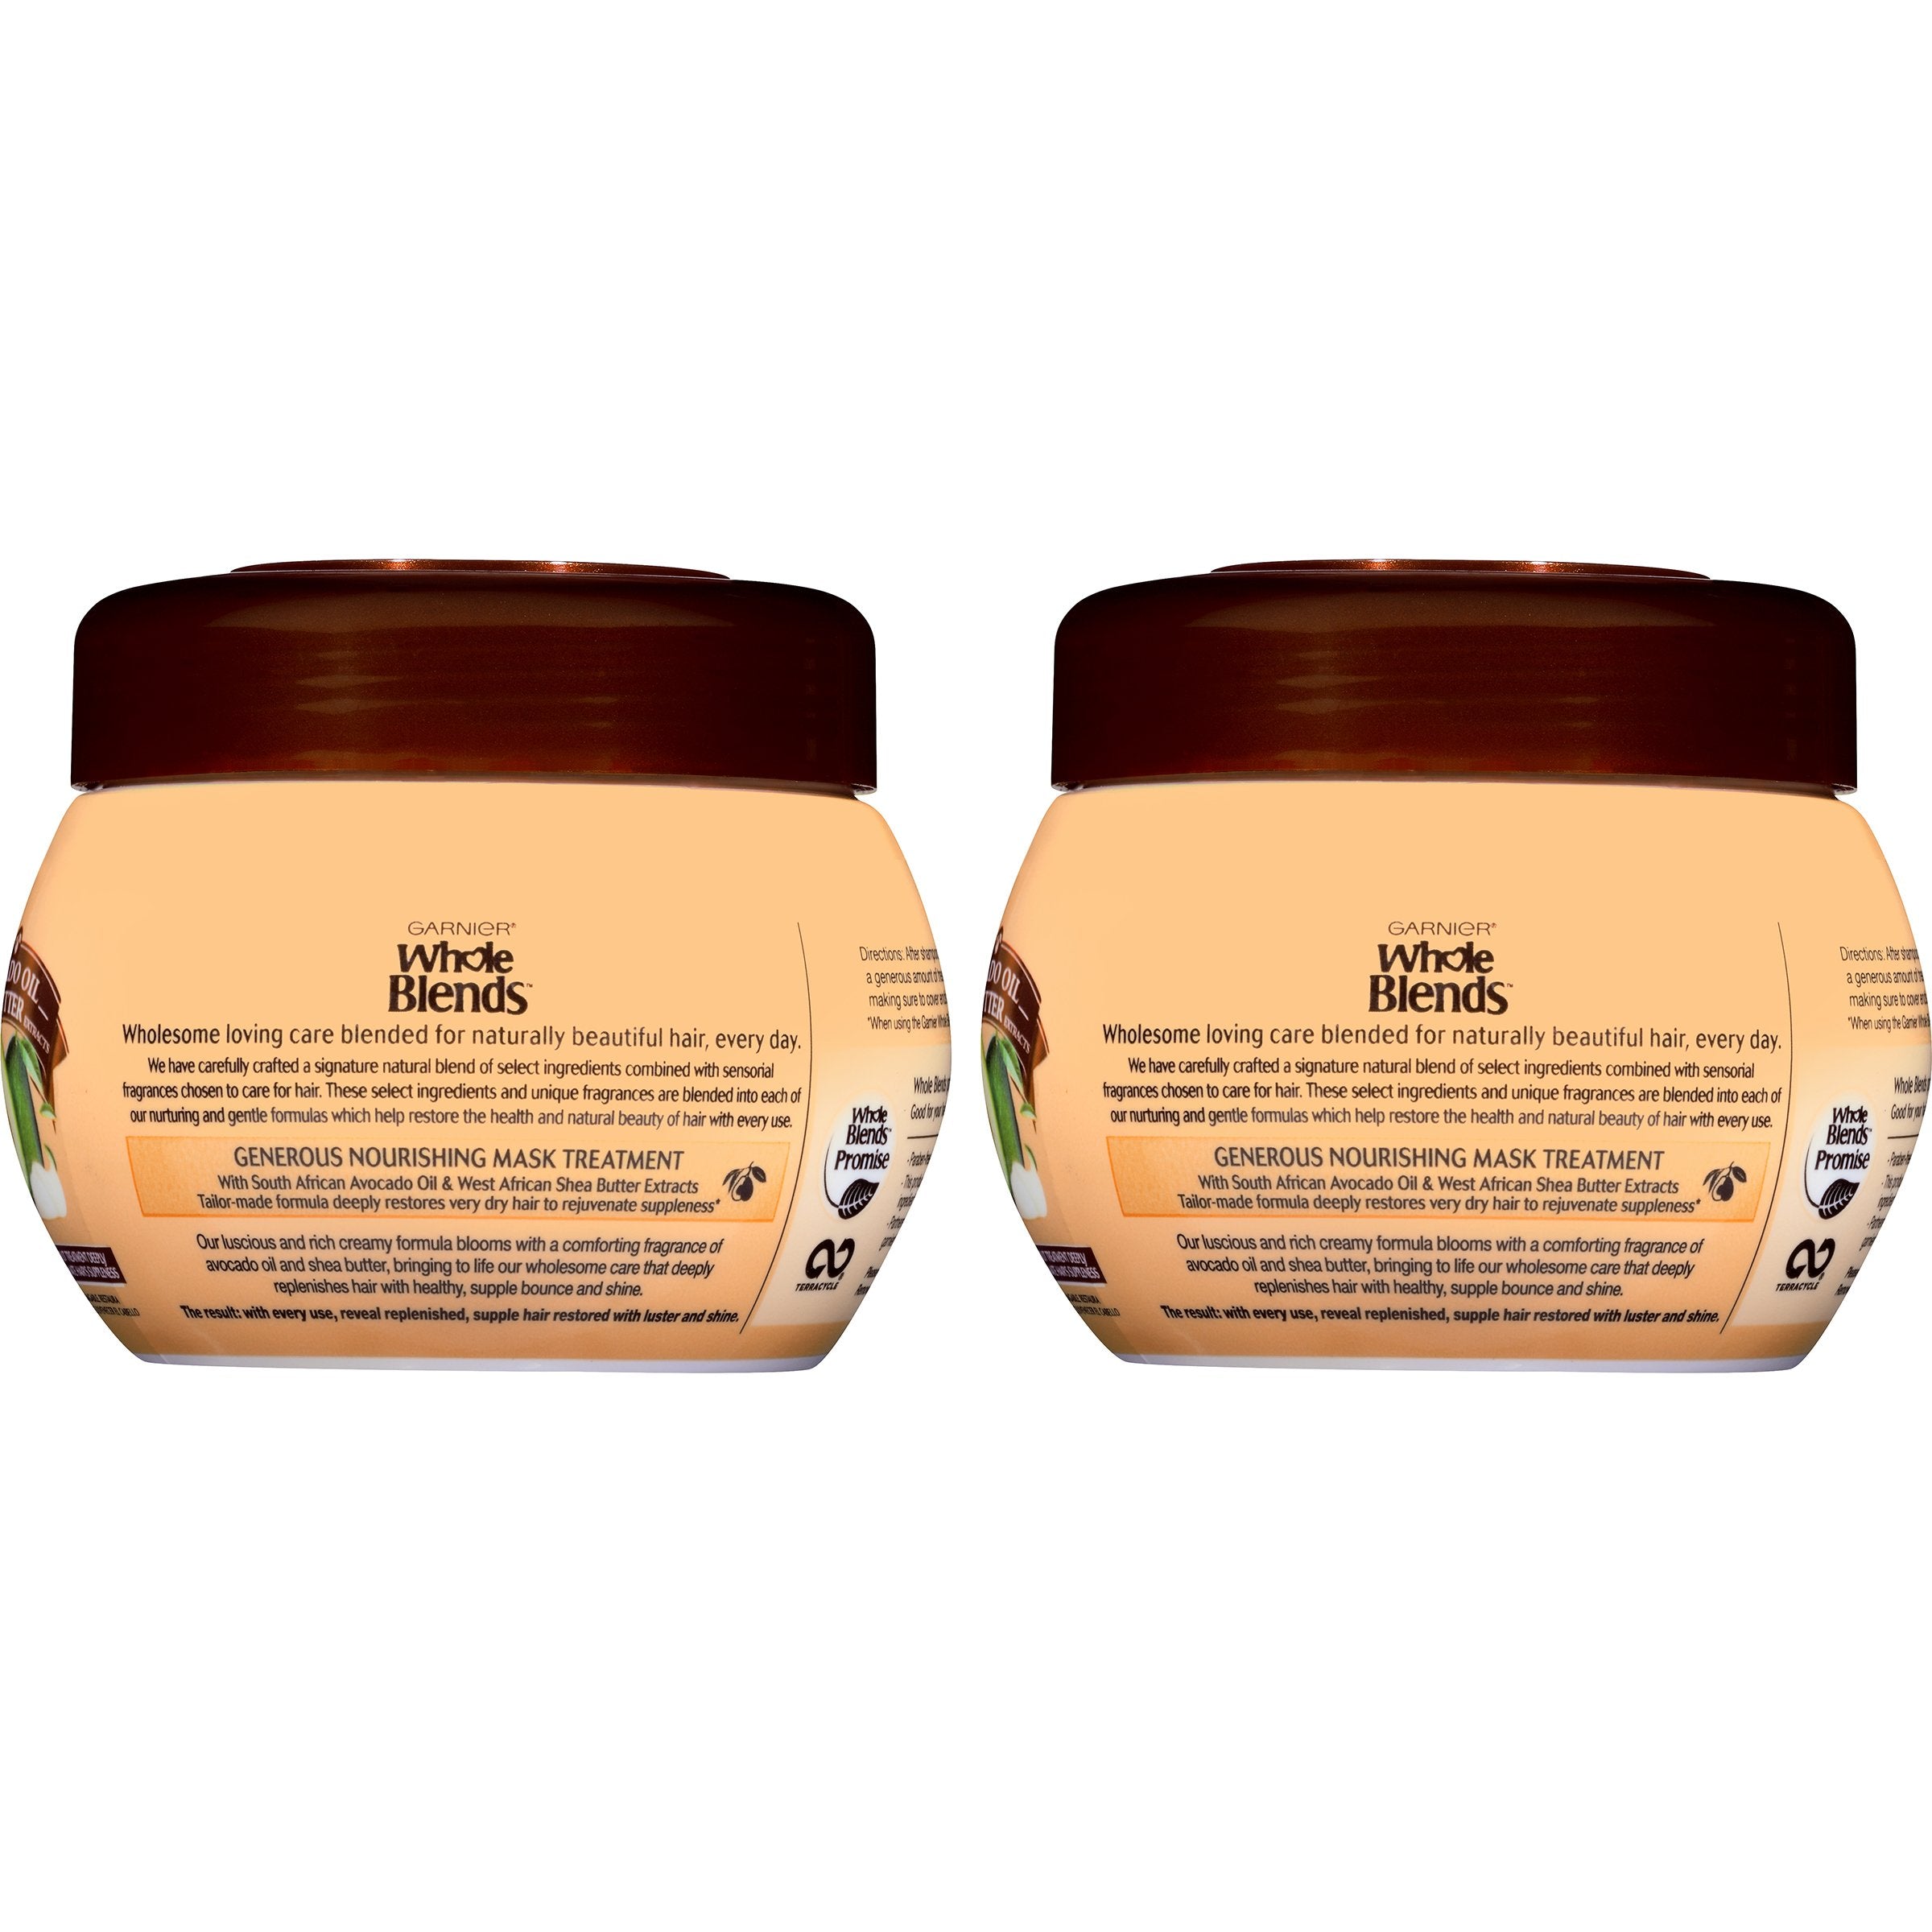 Garnier Whole Blends Hair Mask with Avocado Oil & Shea Butter Extracts, 2 count-CaribOnline